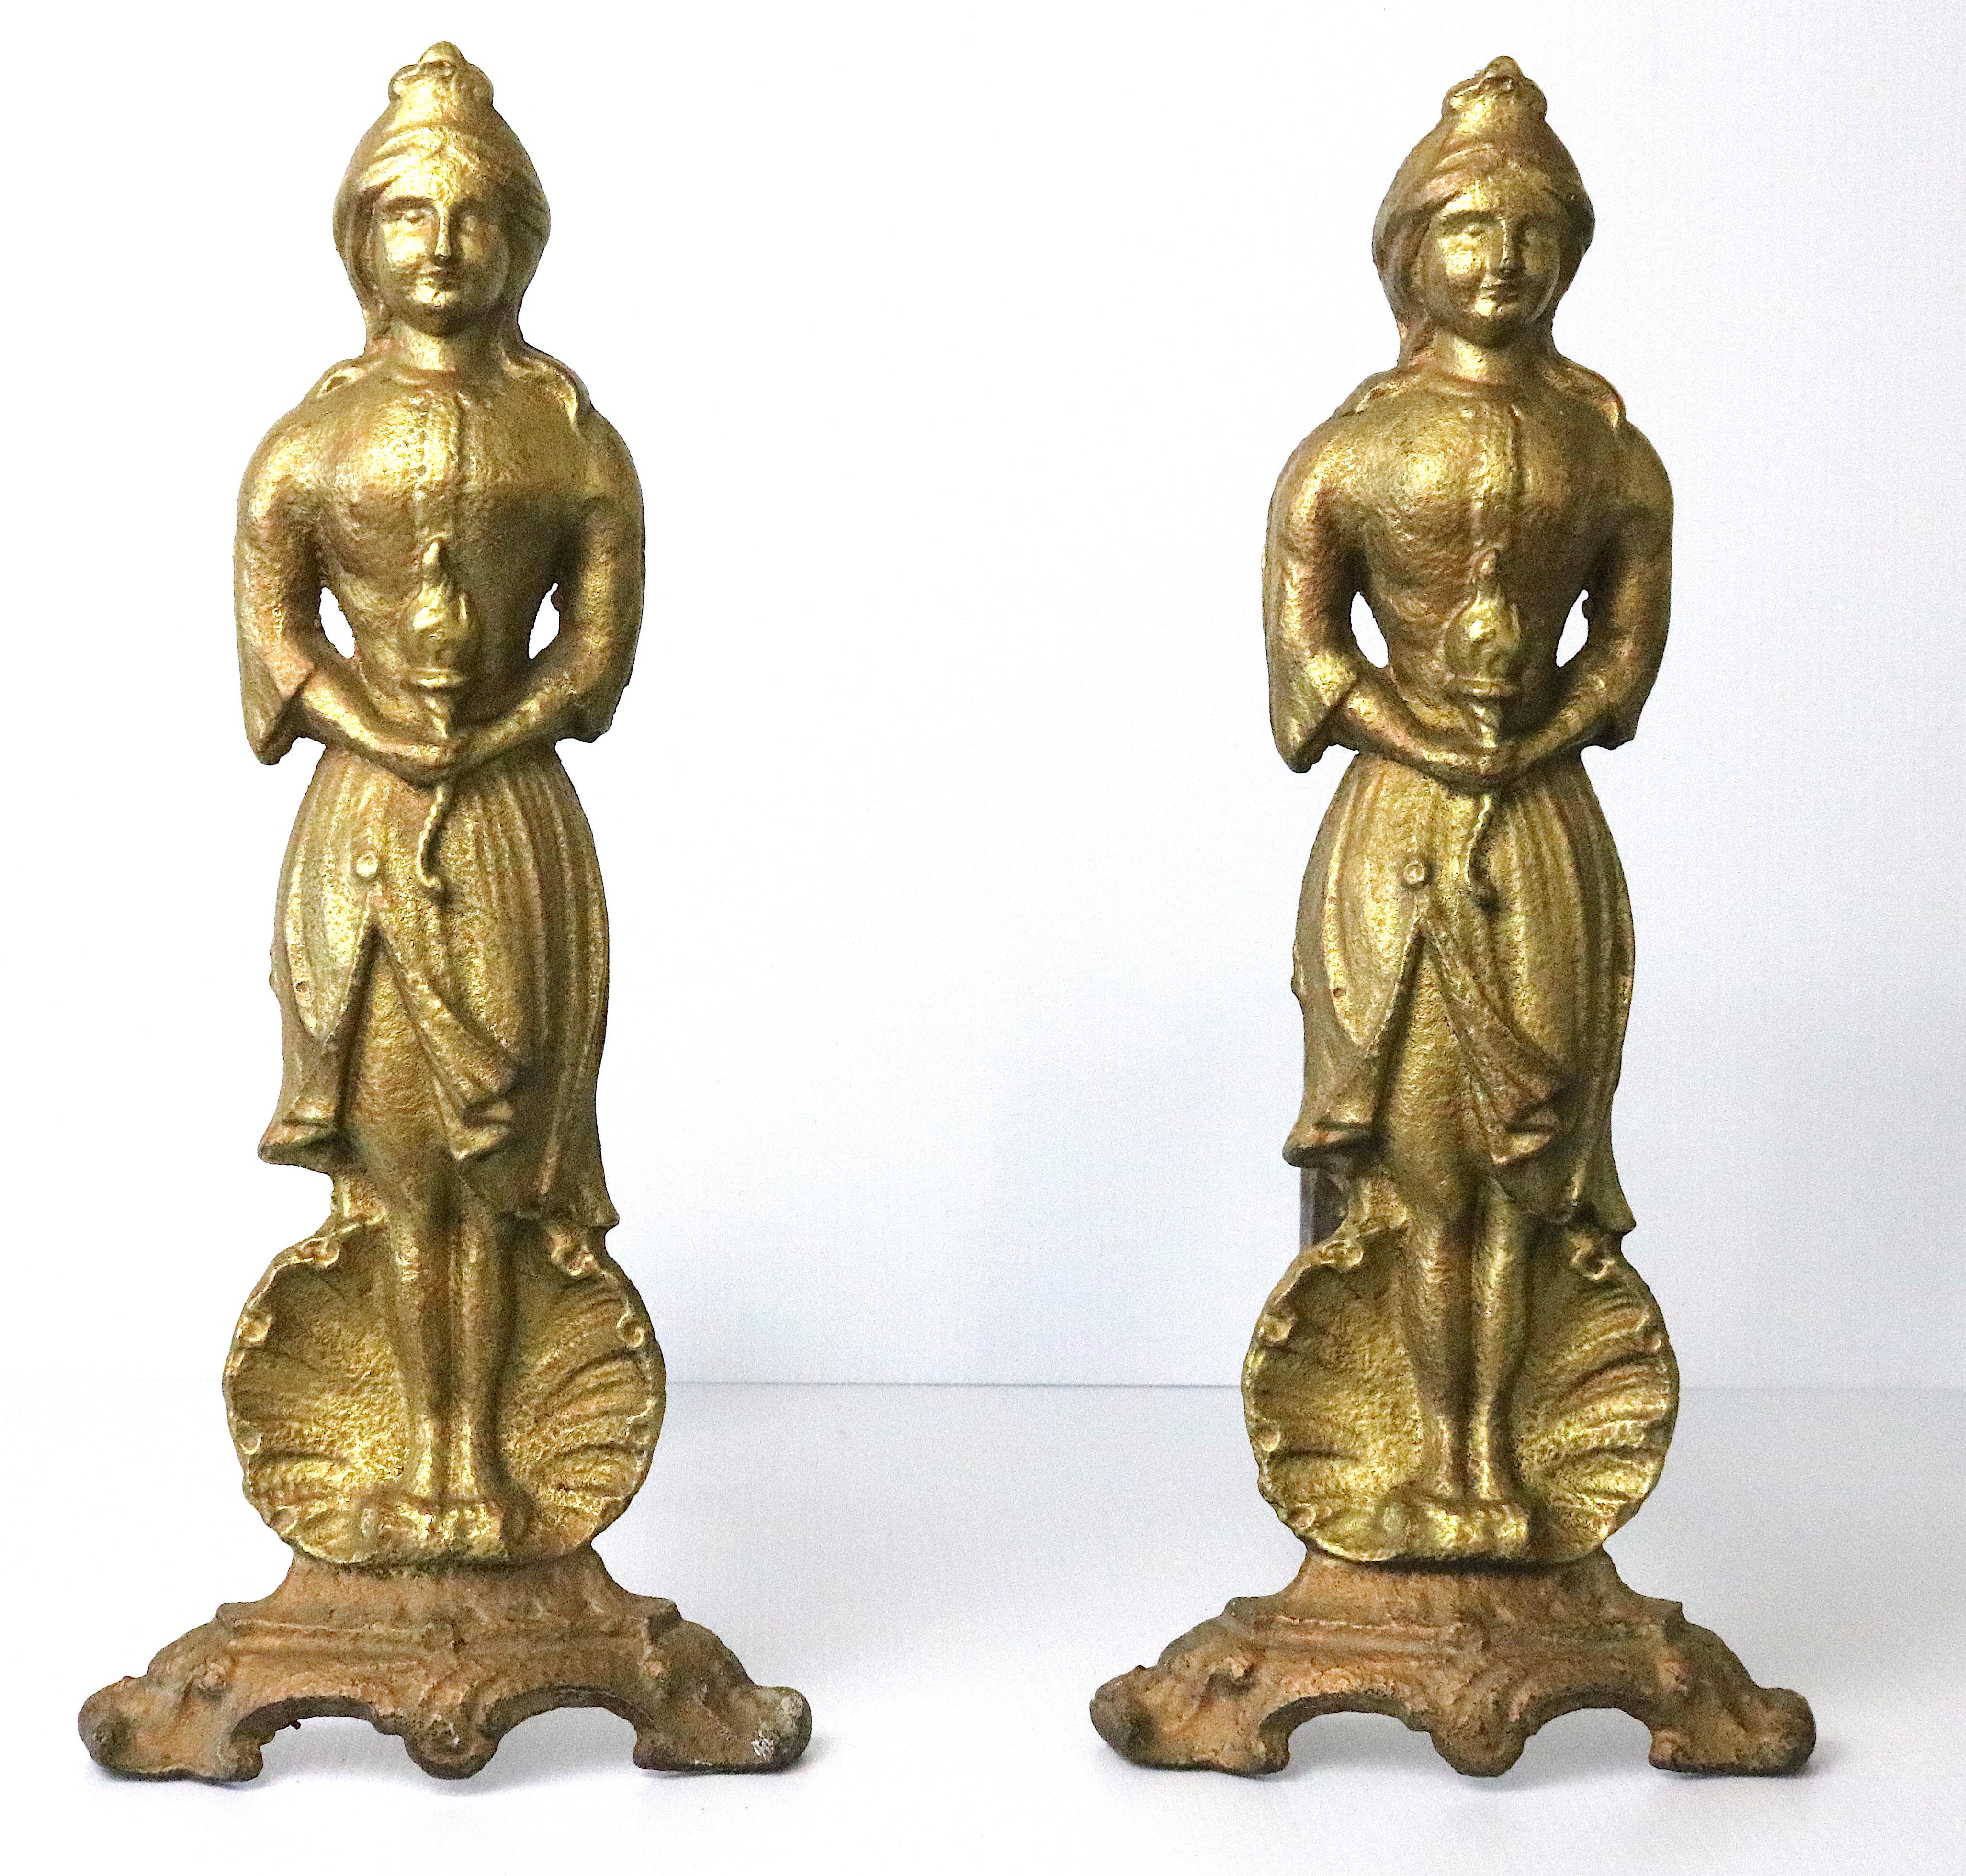 Distinctive figural Victorian andirons- antique Lady Liberty

This is an antique pair of gilt cast iron andirons in the form of the American Lady Liberty with the freedom torch in her hand and a nautilus shell behind her legs,
circa